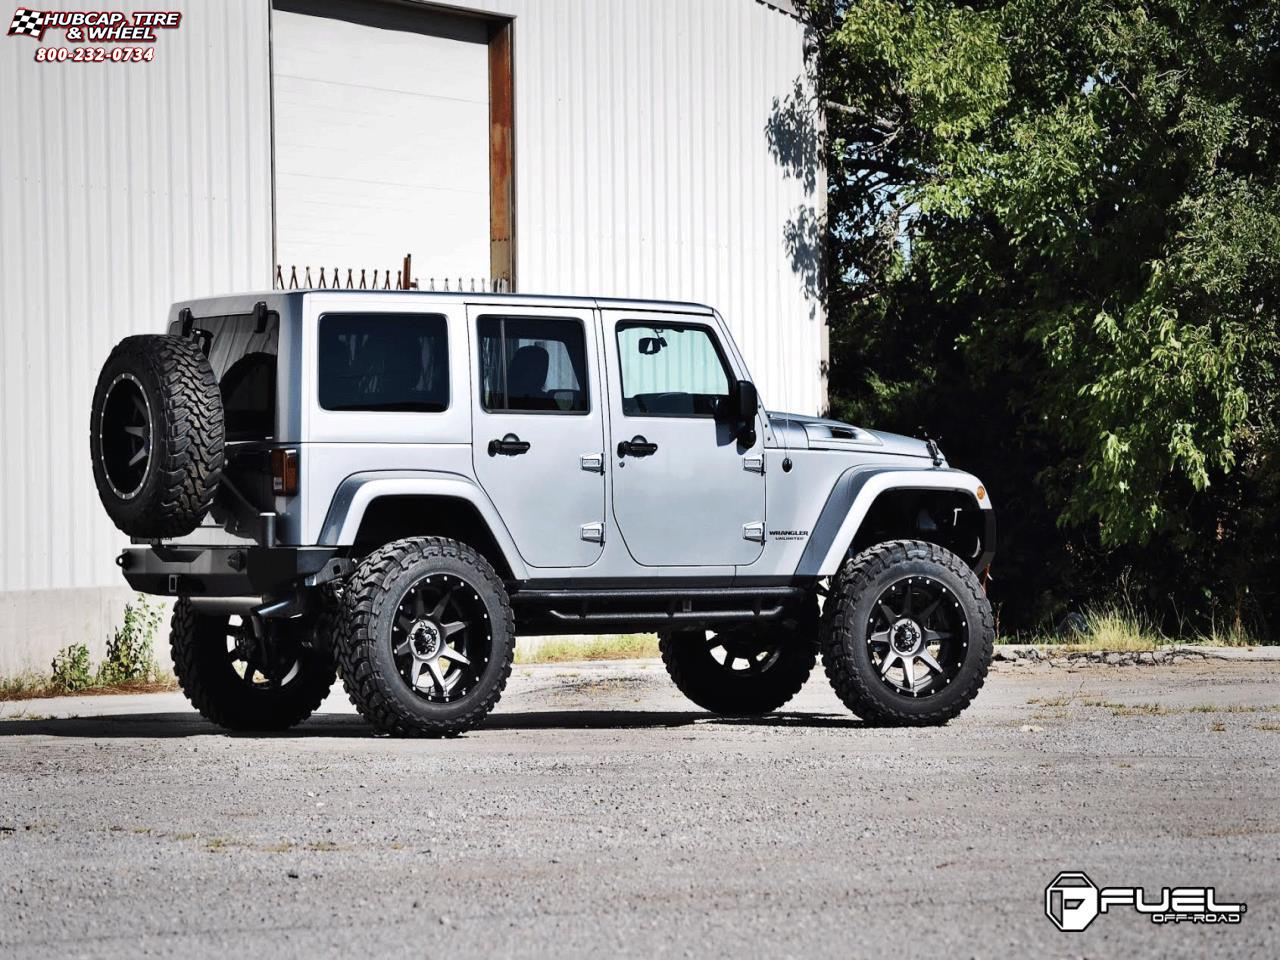 vehicle gallery/jeep wrangler fuel rampage d238 20X12  Anthracite center, gloss black lip wheels and rims